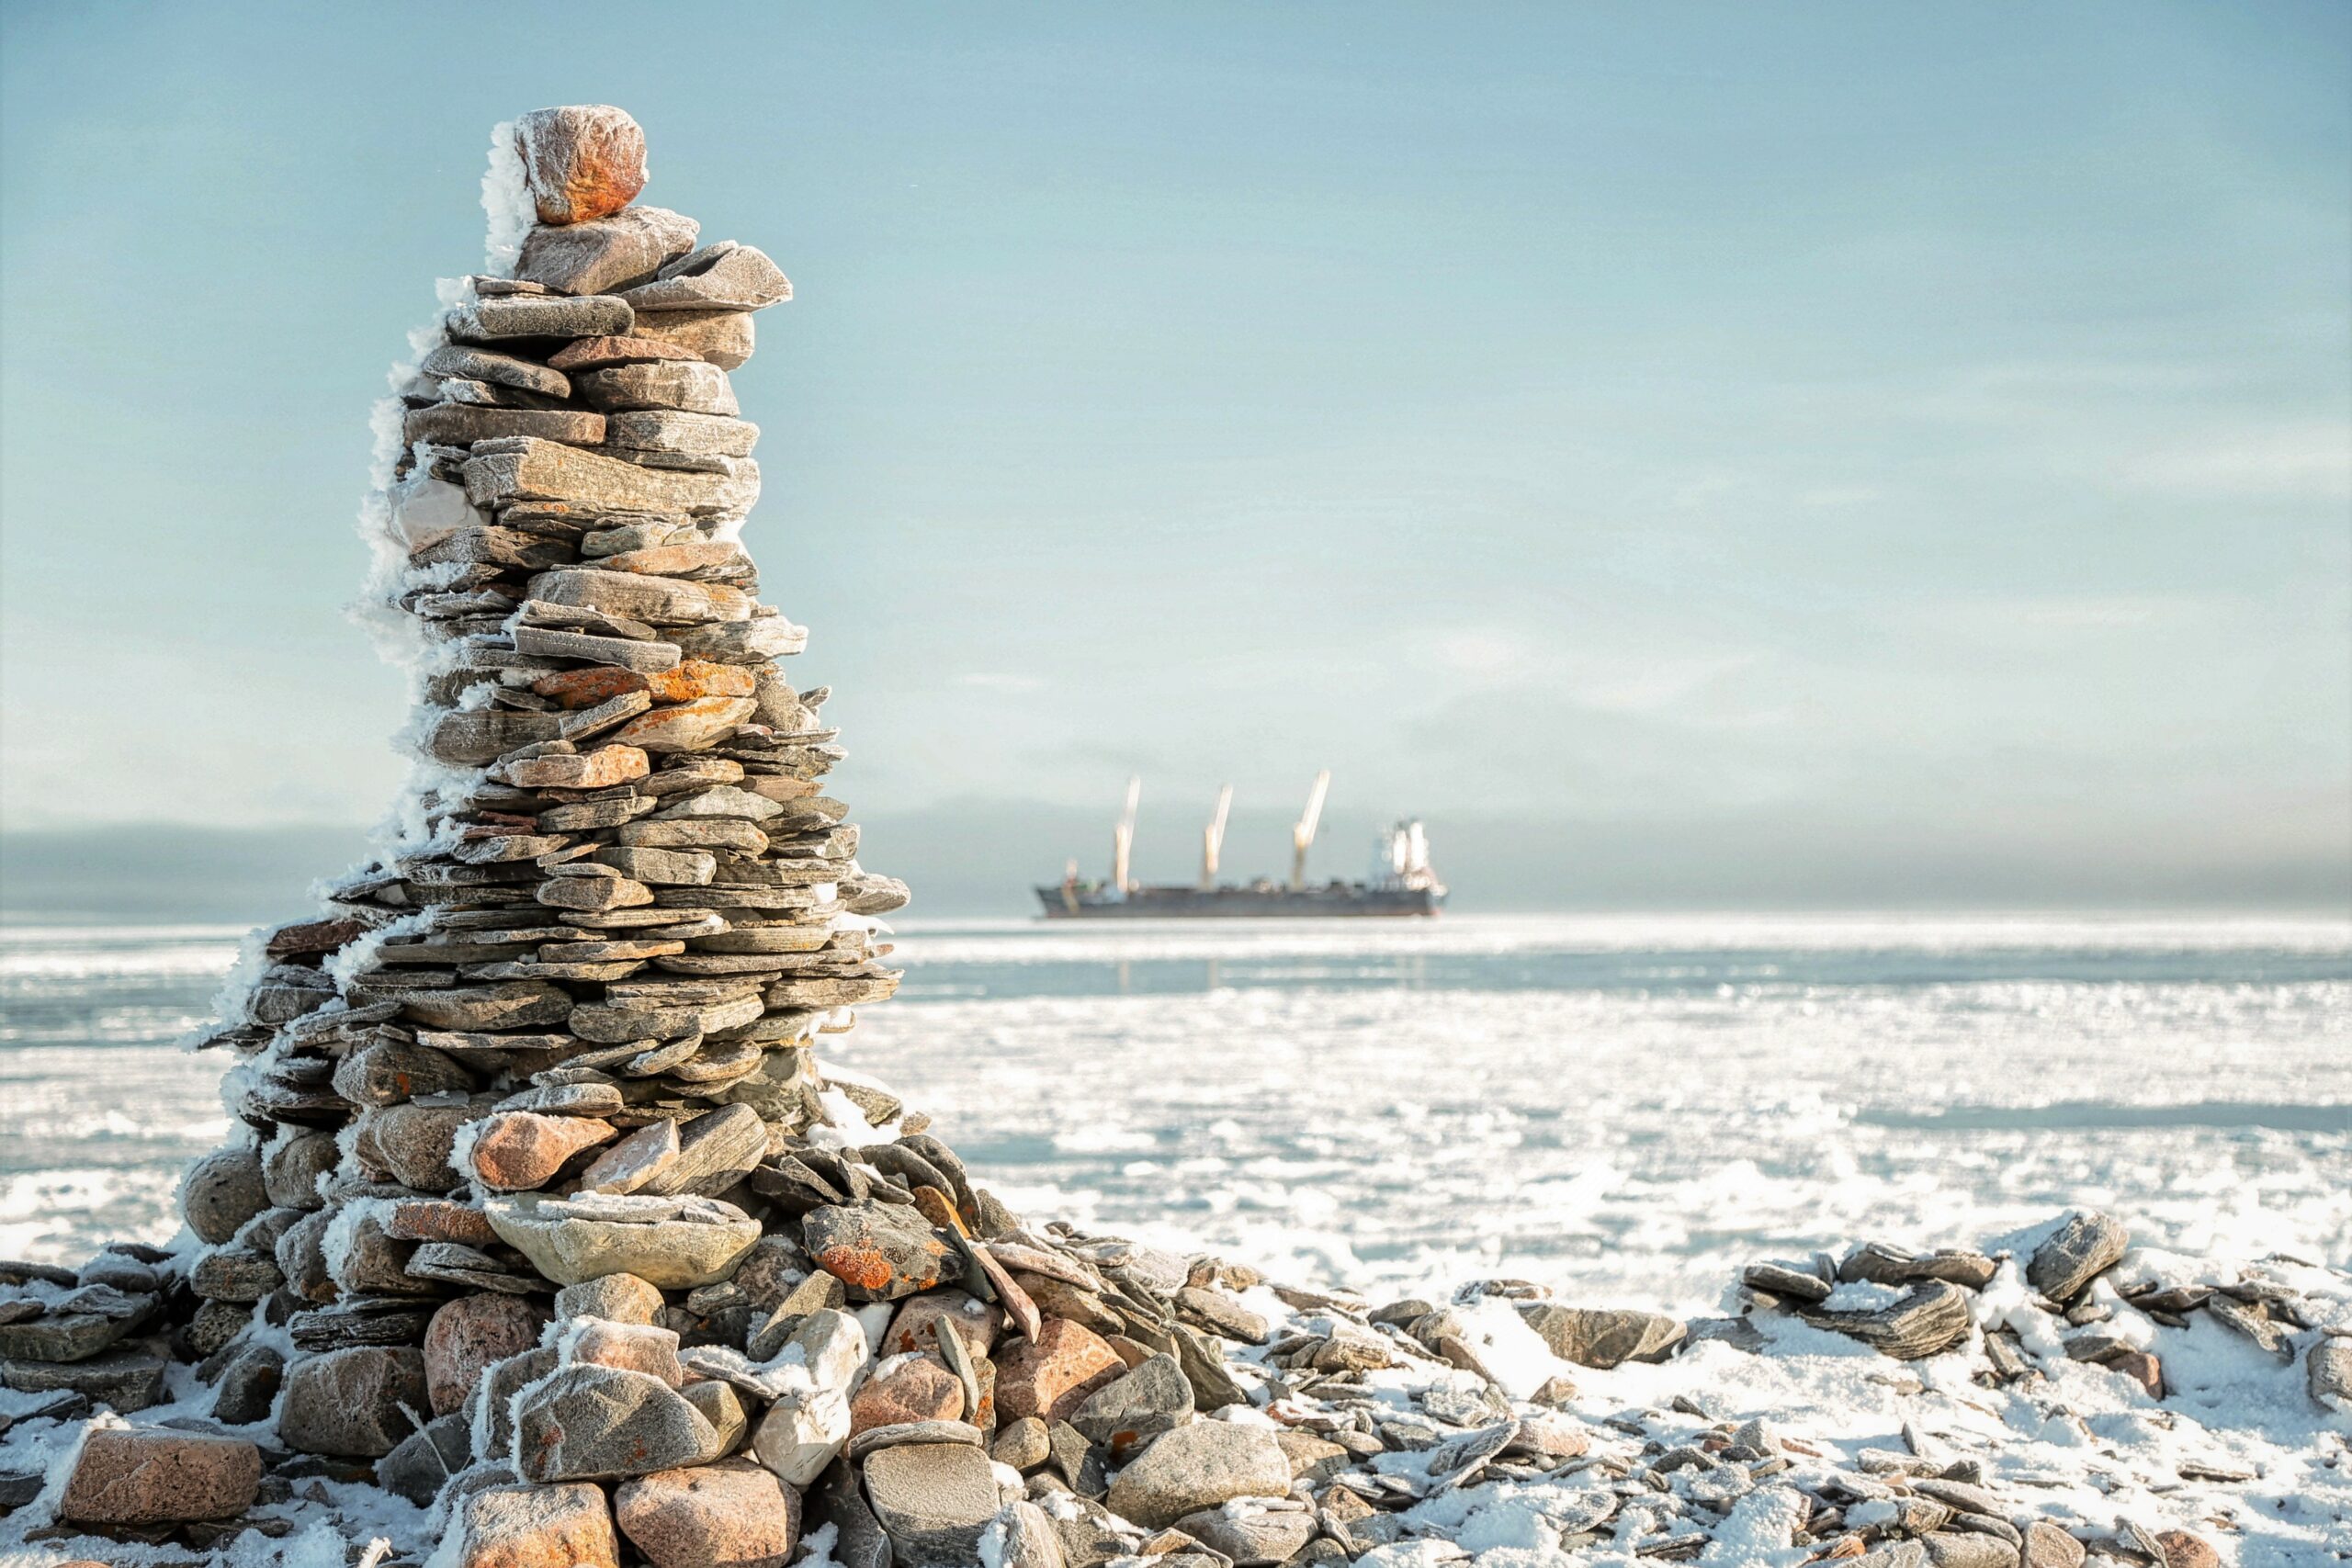 Inuksuk on shore in the foreground as a supply ship moors of the coast of Arviat, Nunavut